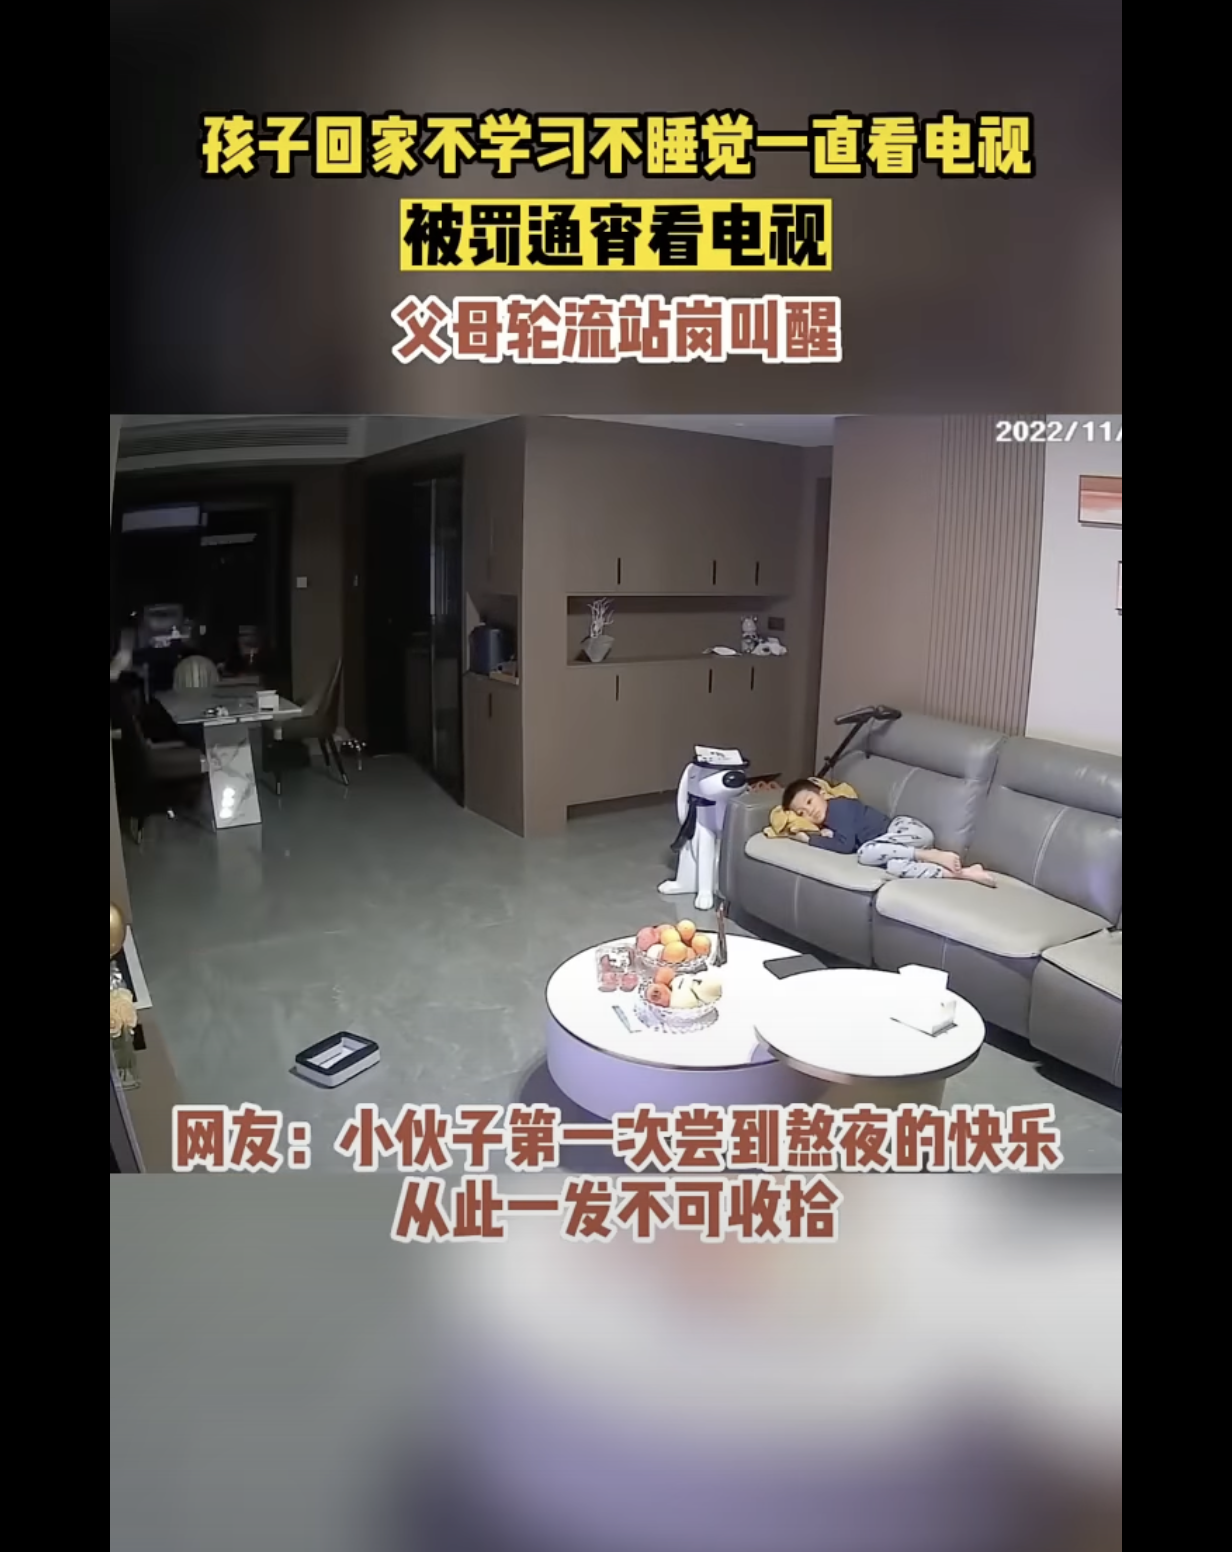 The boy is pictured lying on the sofa in the living room. | Source: youtube.com/趣事大赏